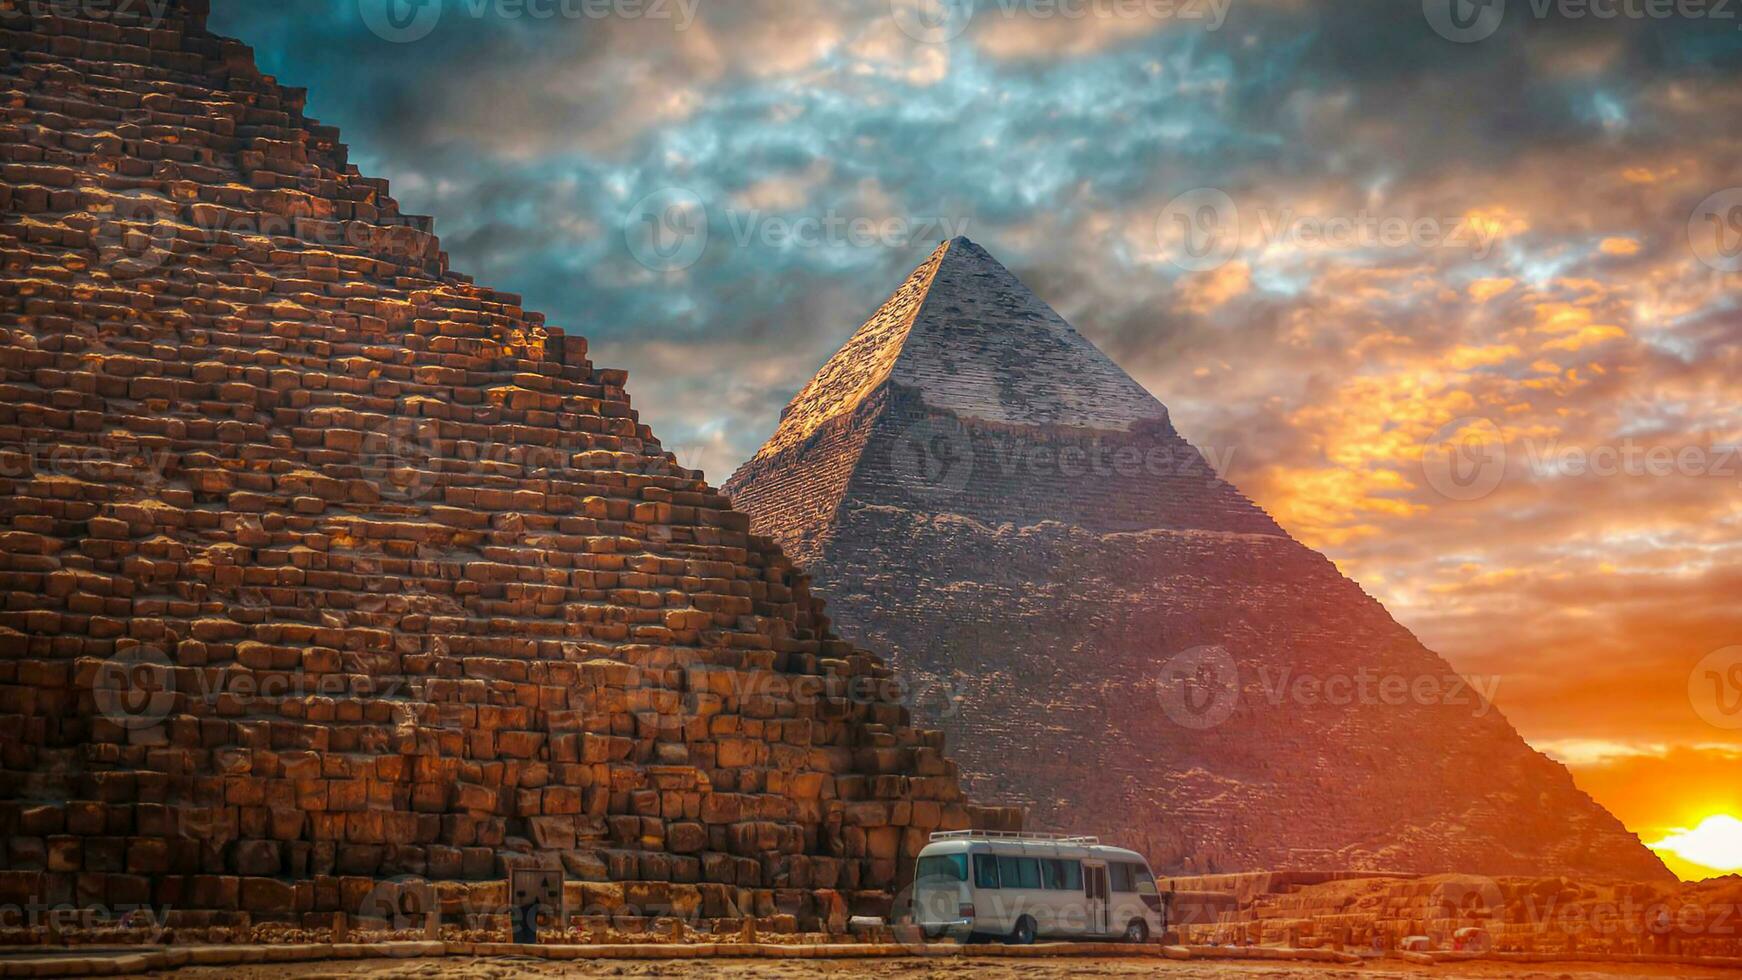 A beautiful picture of the pyramids in Giza, Egypt at sunset photo